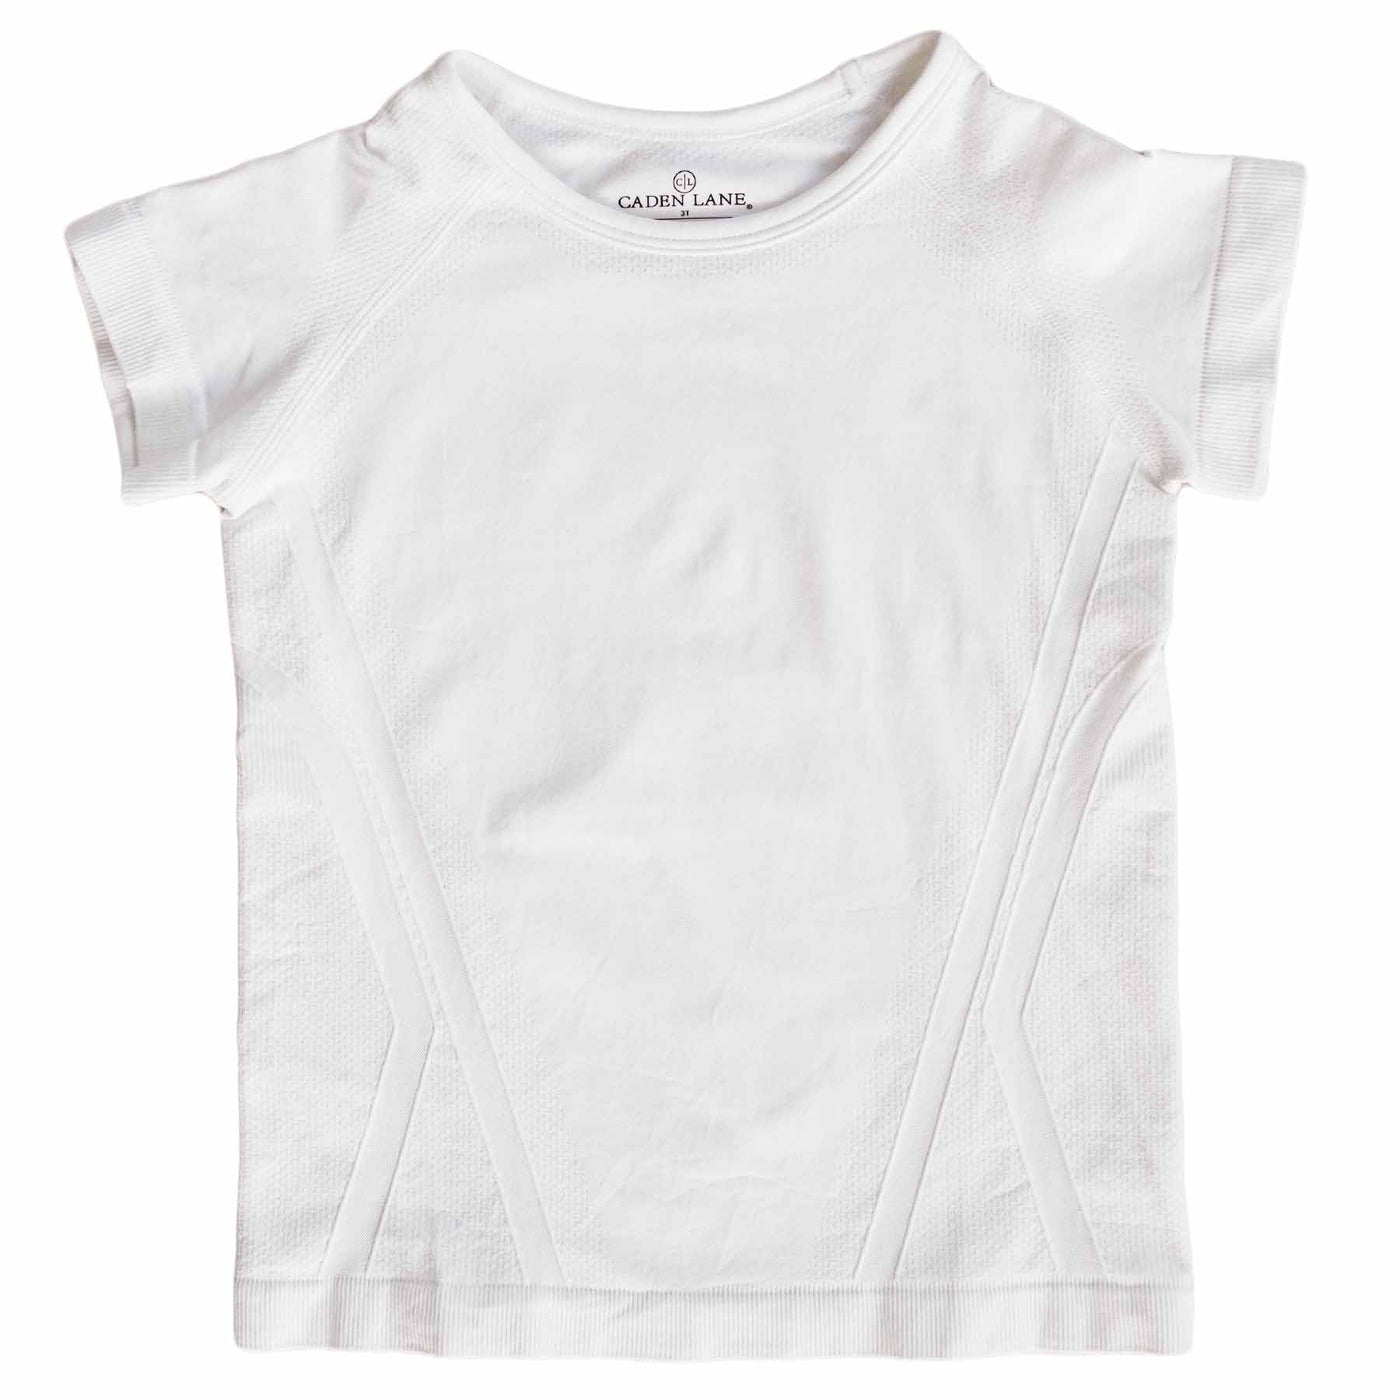 white short sleeve athletic top for kids 